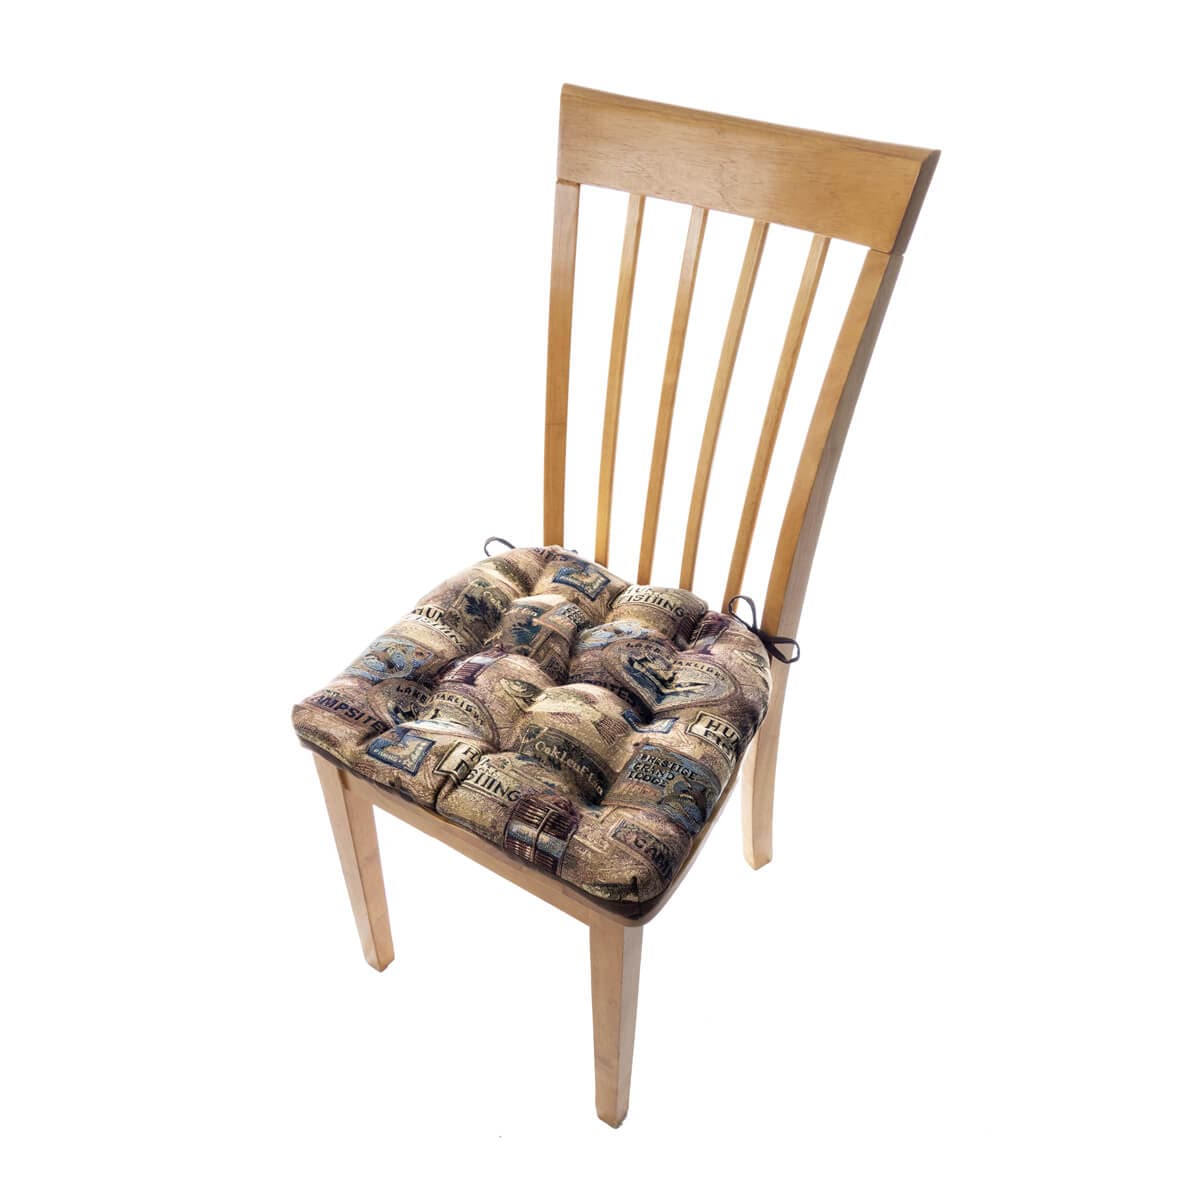 Woodlands Fish Camp Dining Chair Pads - Barnett Home Decor - Brown